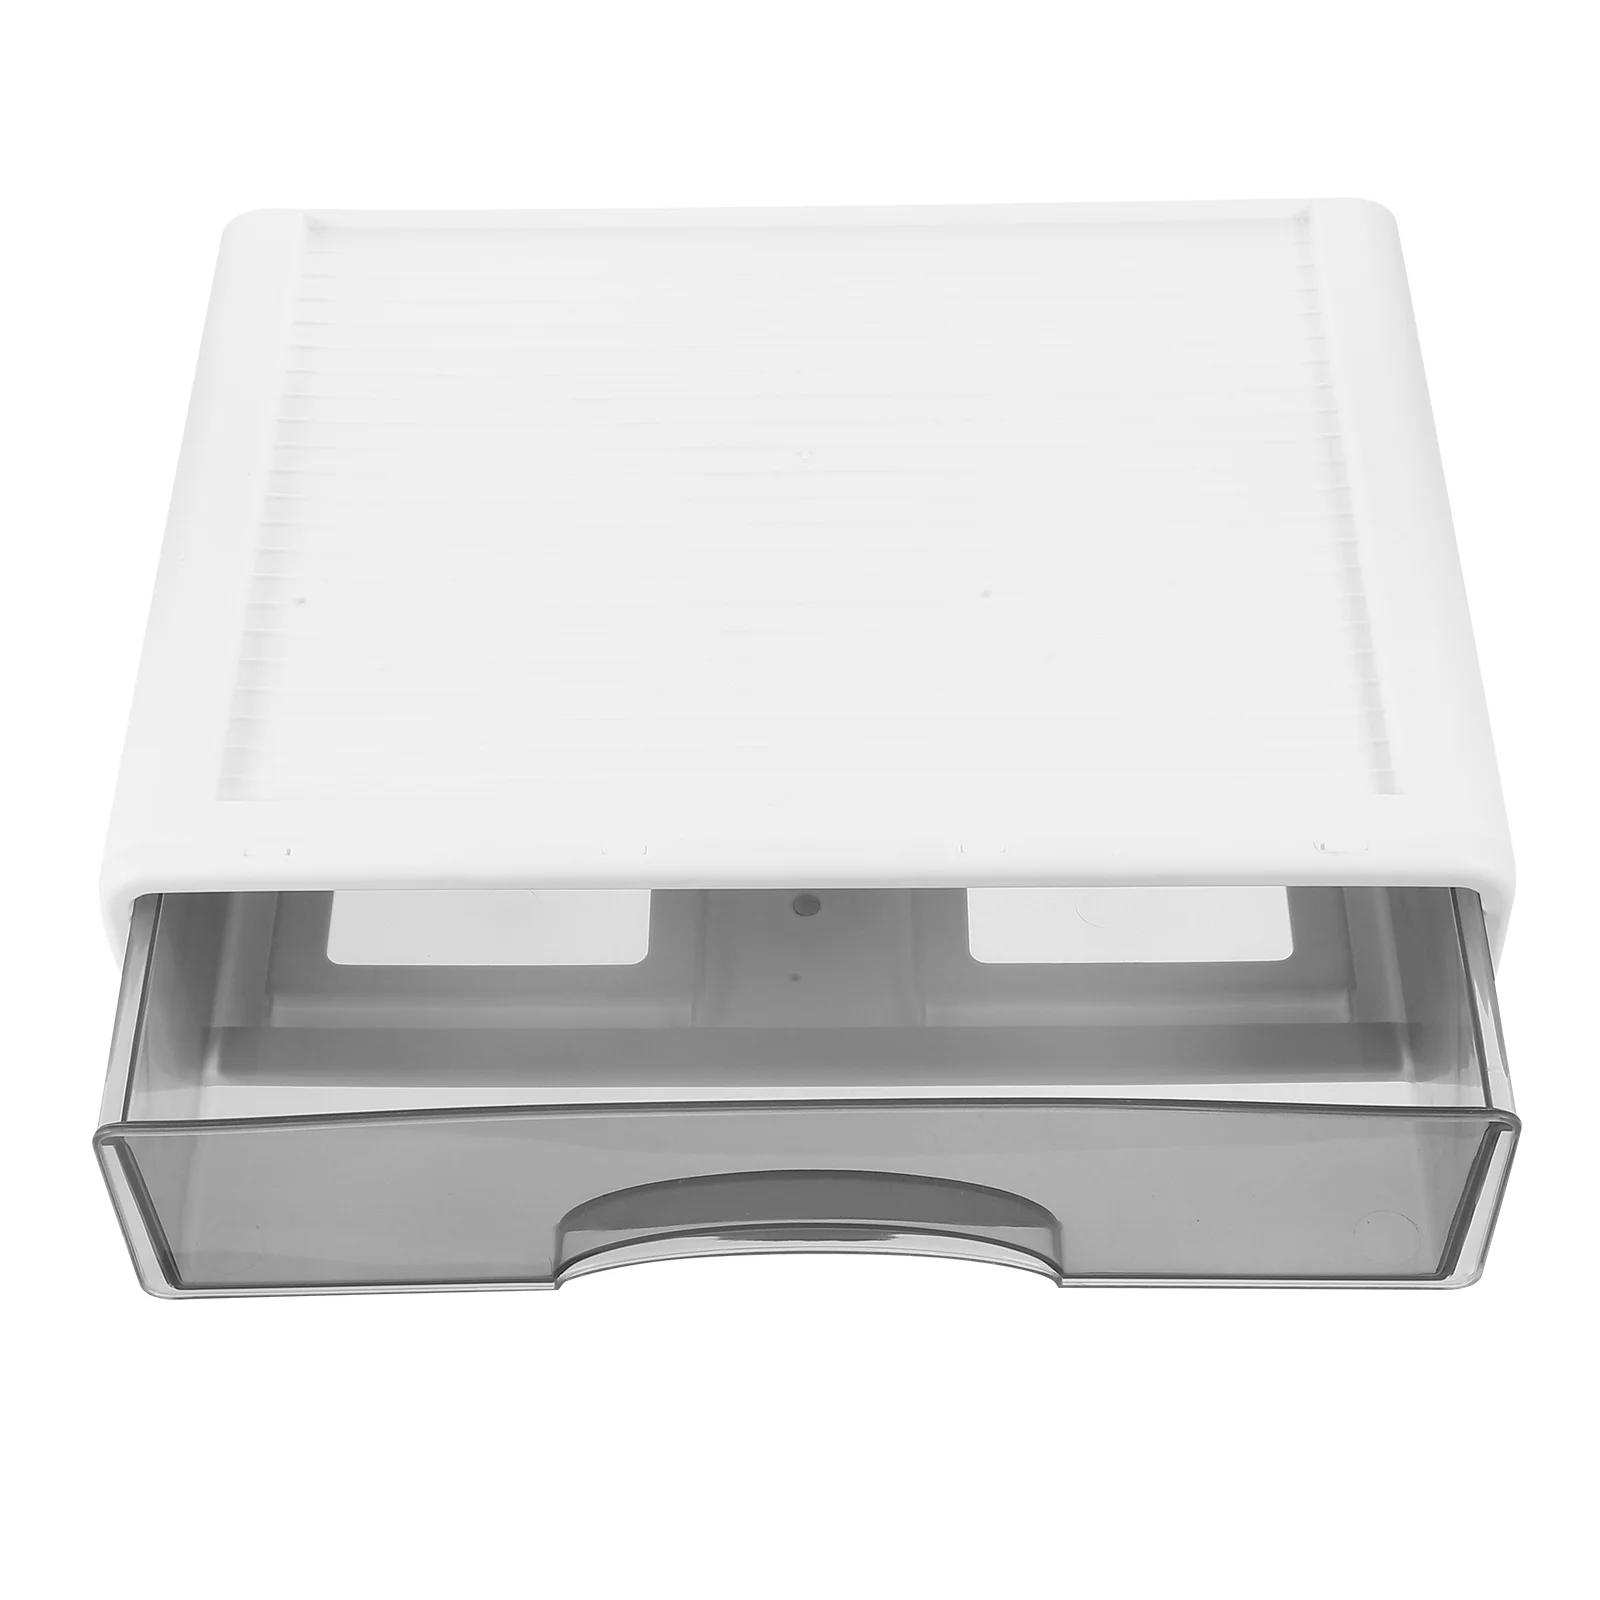 

Desktop Storage Box A4 Paper Drawers Containers with Practical Organizer Chest of Pp Plastic Office Cabinet